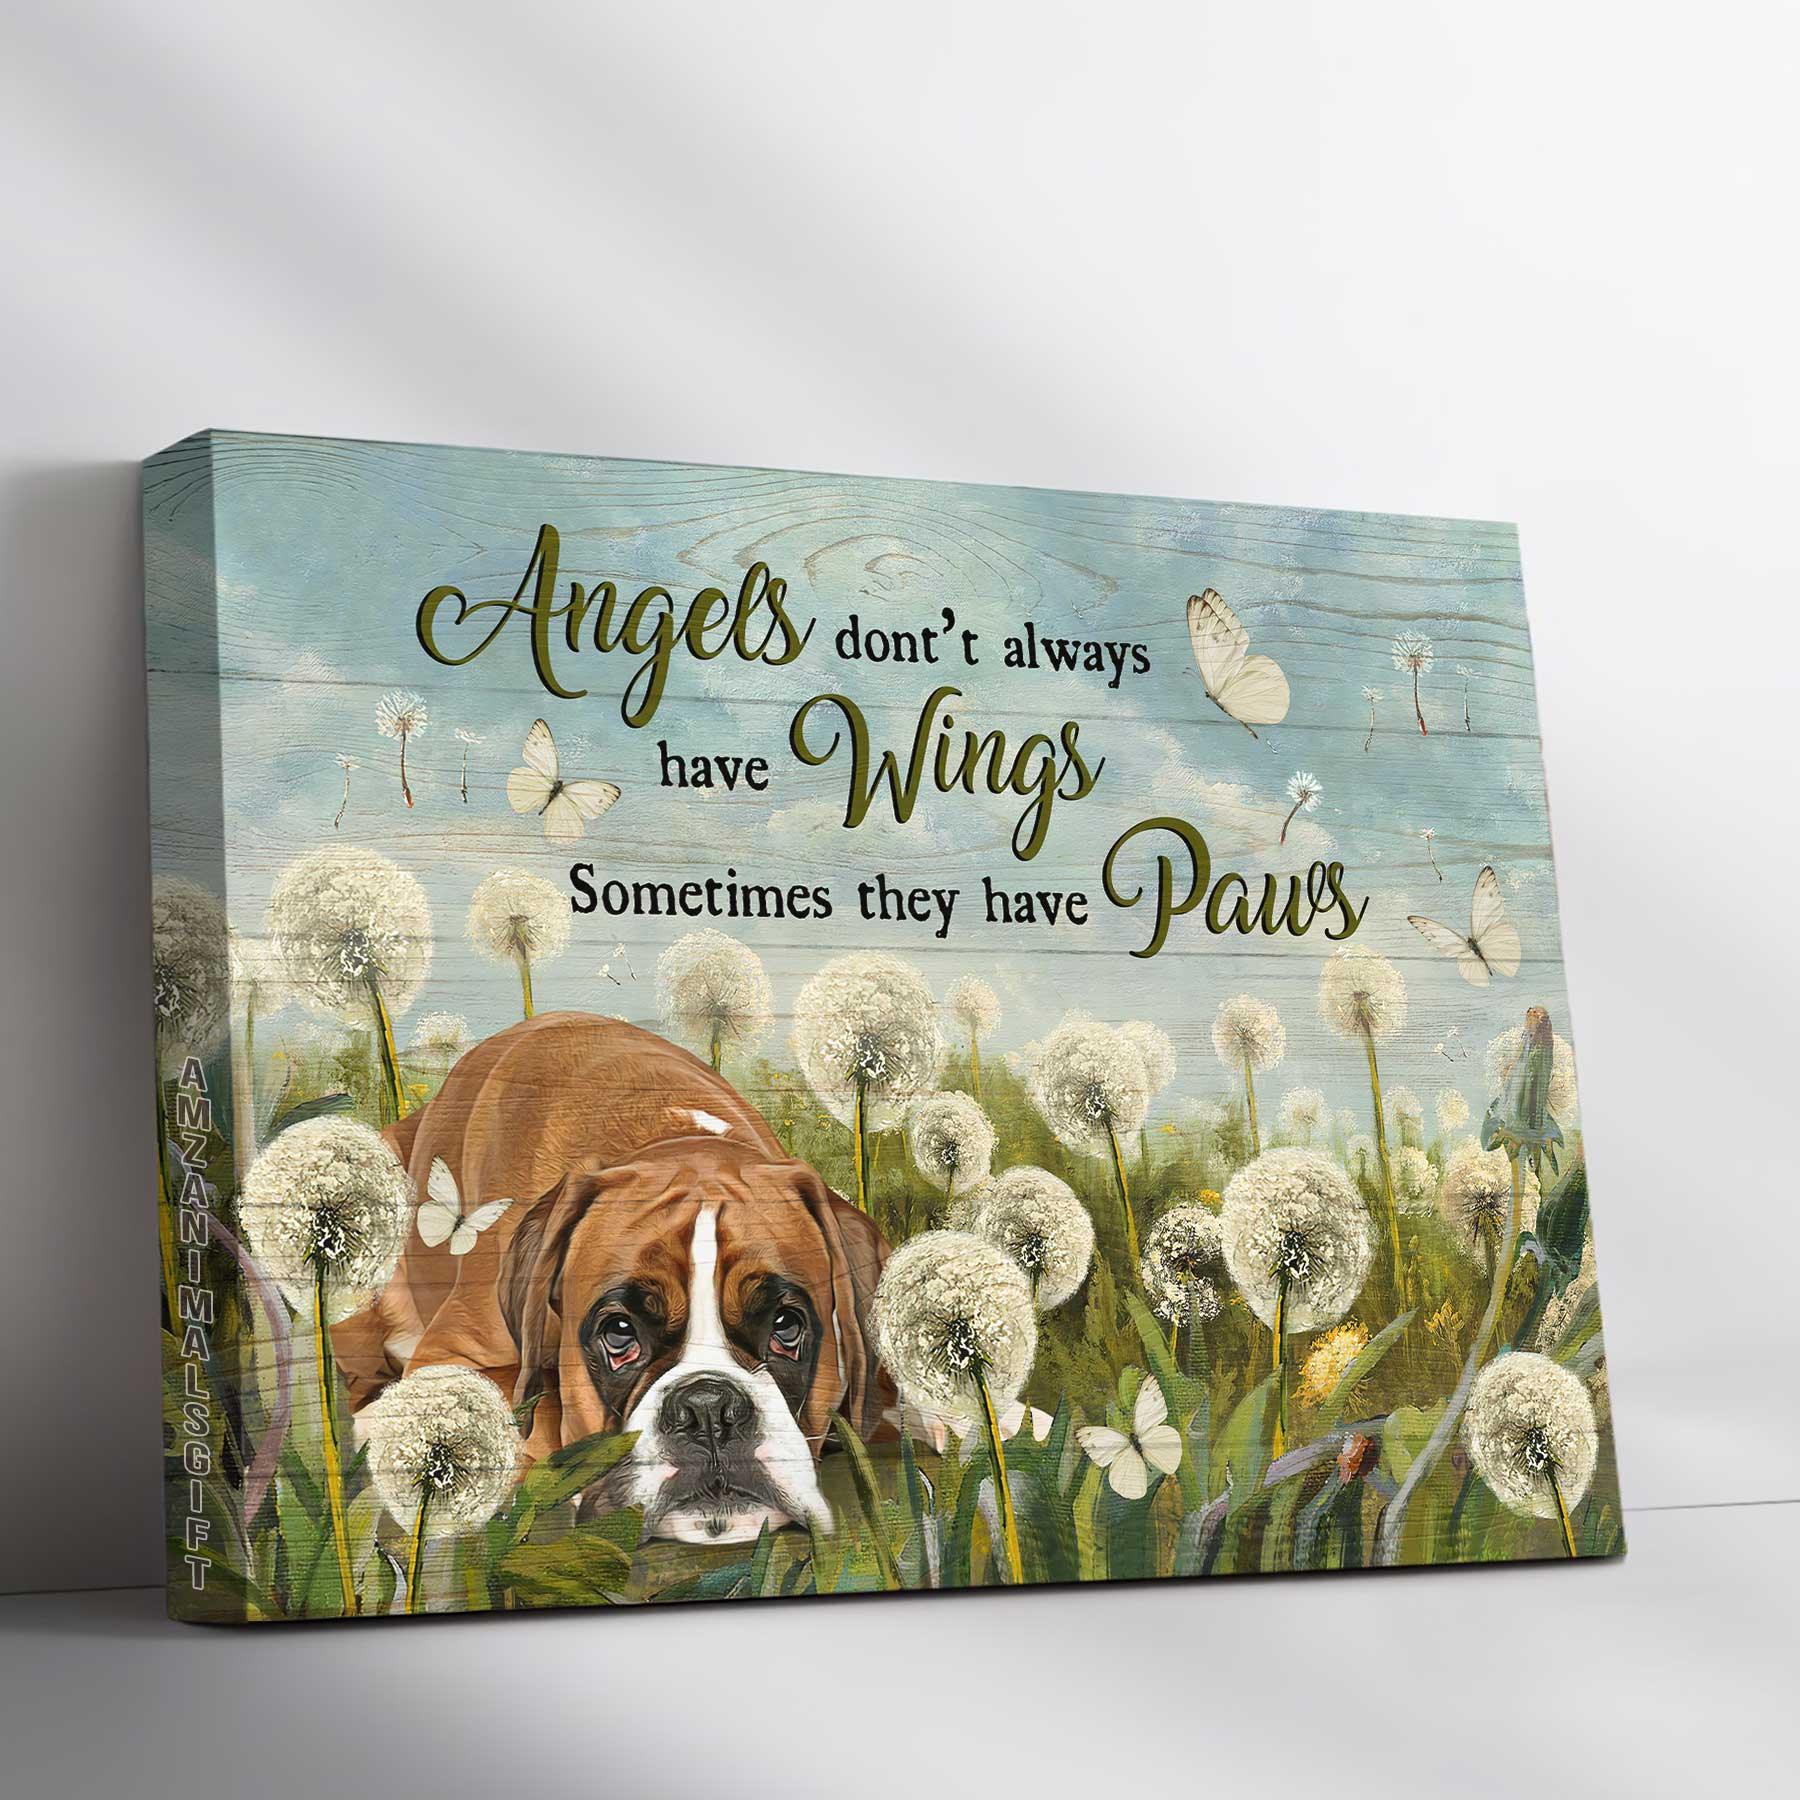 Boxer Premium Wrapped Landscape Canvas - Boxer Painting, Dandelion Field, Angels Don't Always Have Wings - Perfect Gift For Boxer Lovers - Amzanimalsgift